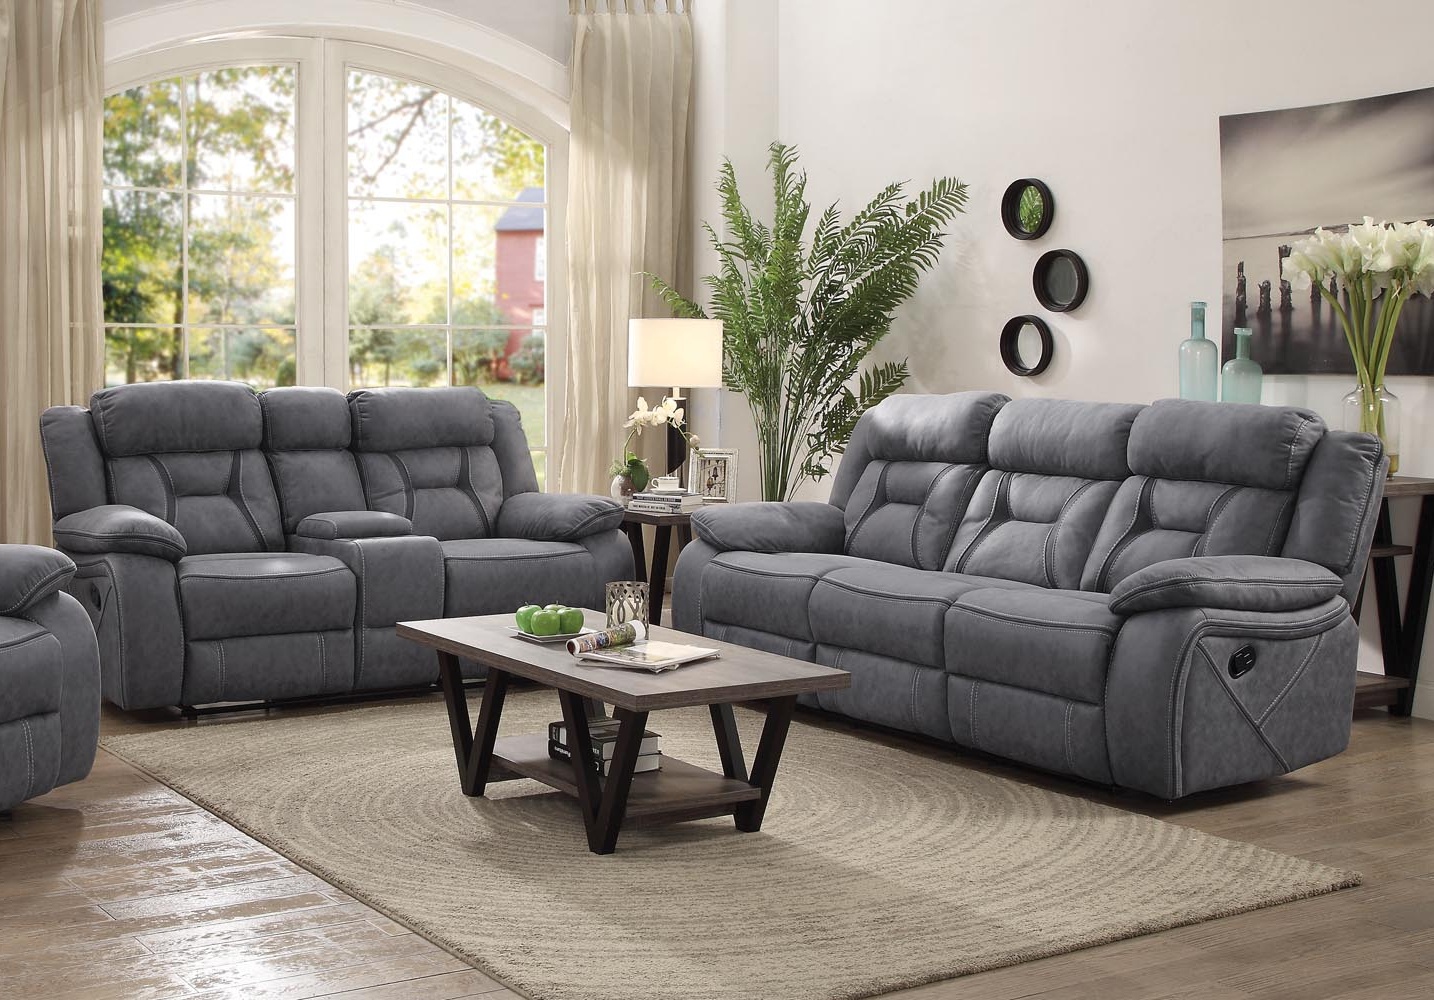 Unique Living Room Furniture Outlet with Simple Decor